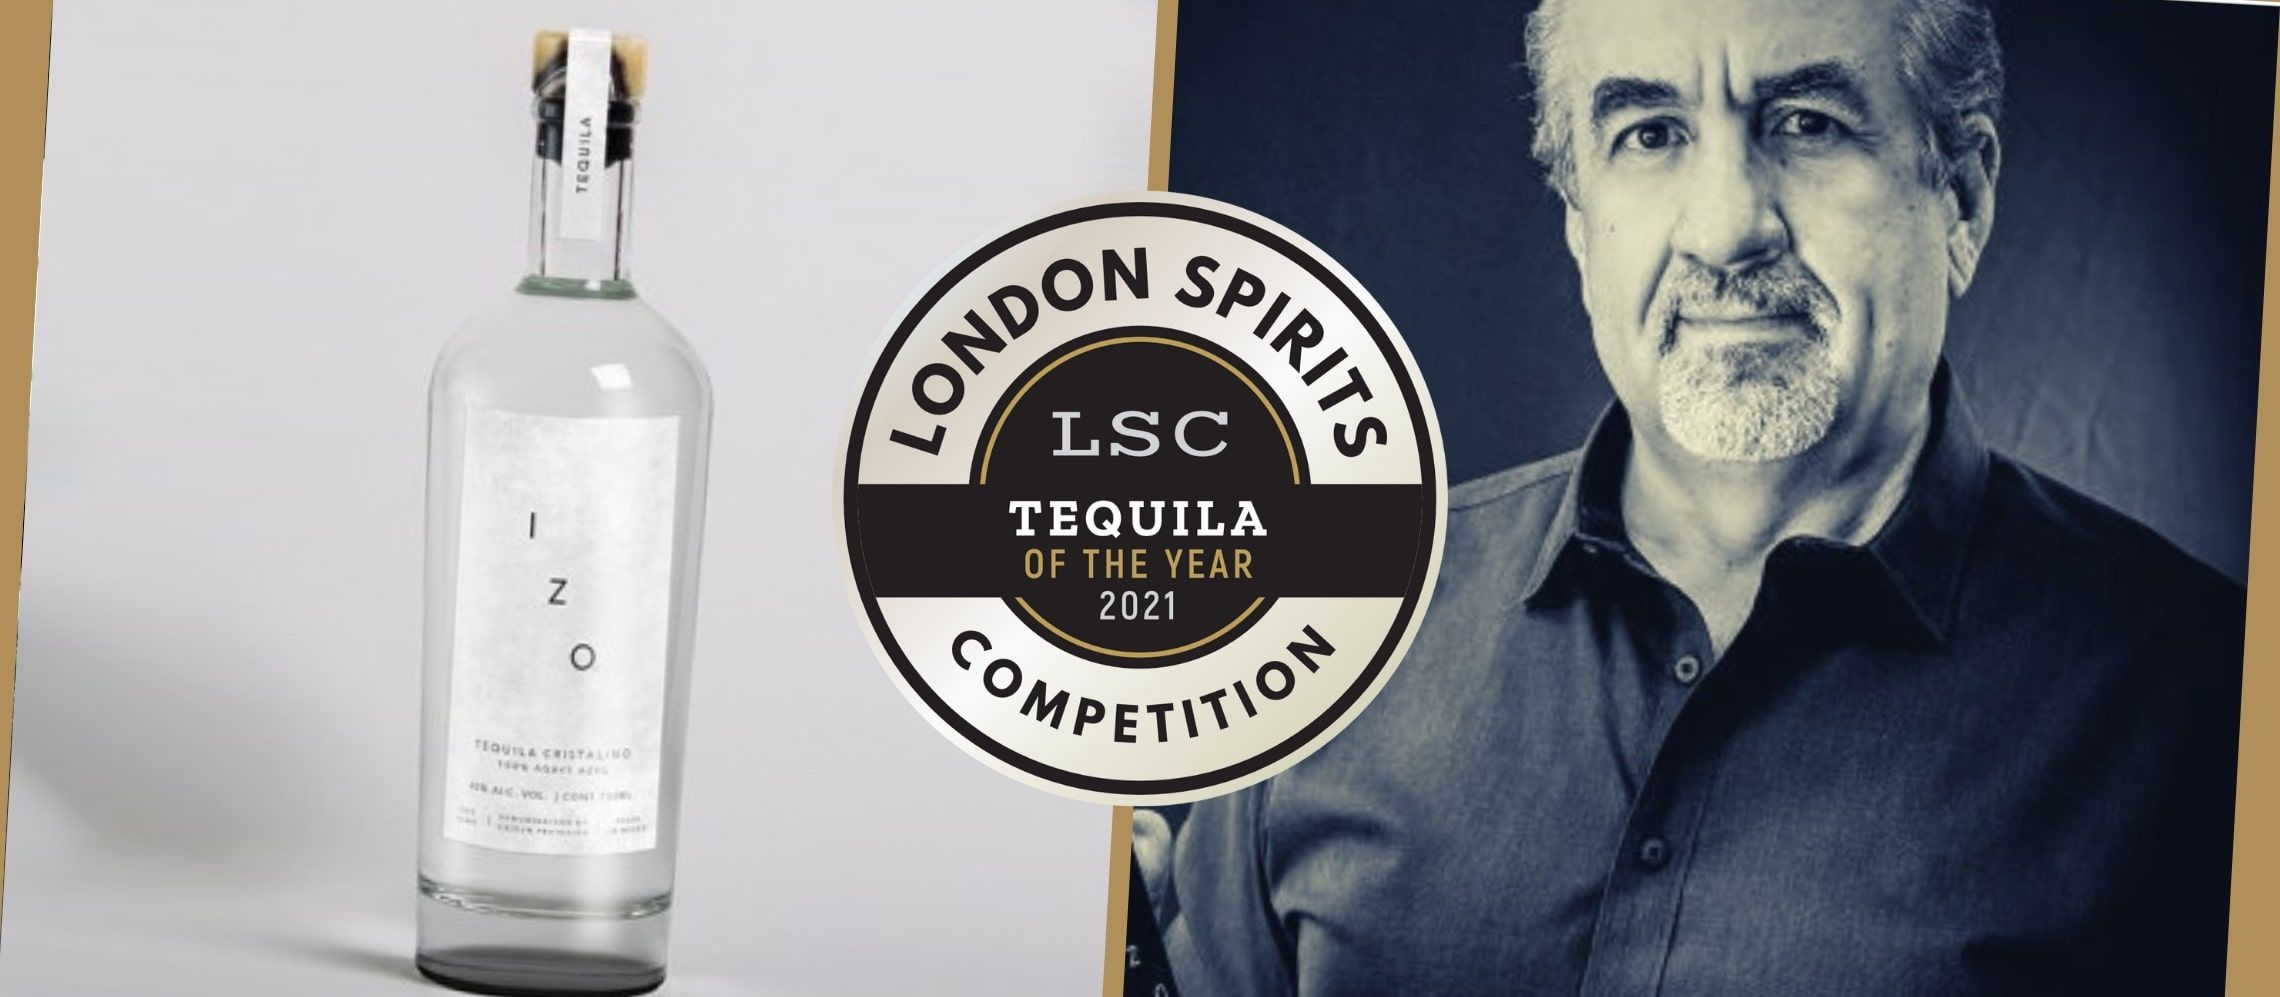 Photo for: IZO 100% Agave Tequila Extra Añejo Cristalino Wins Tequila Of The Year At London Spirits Competition Via There San Diego PR